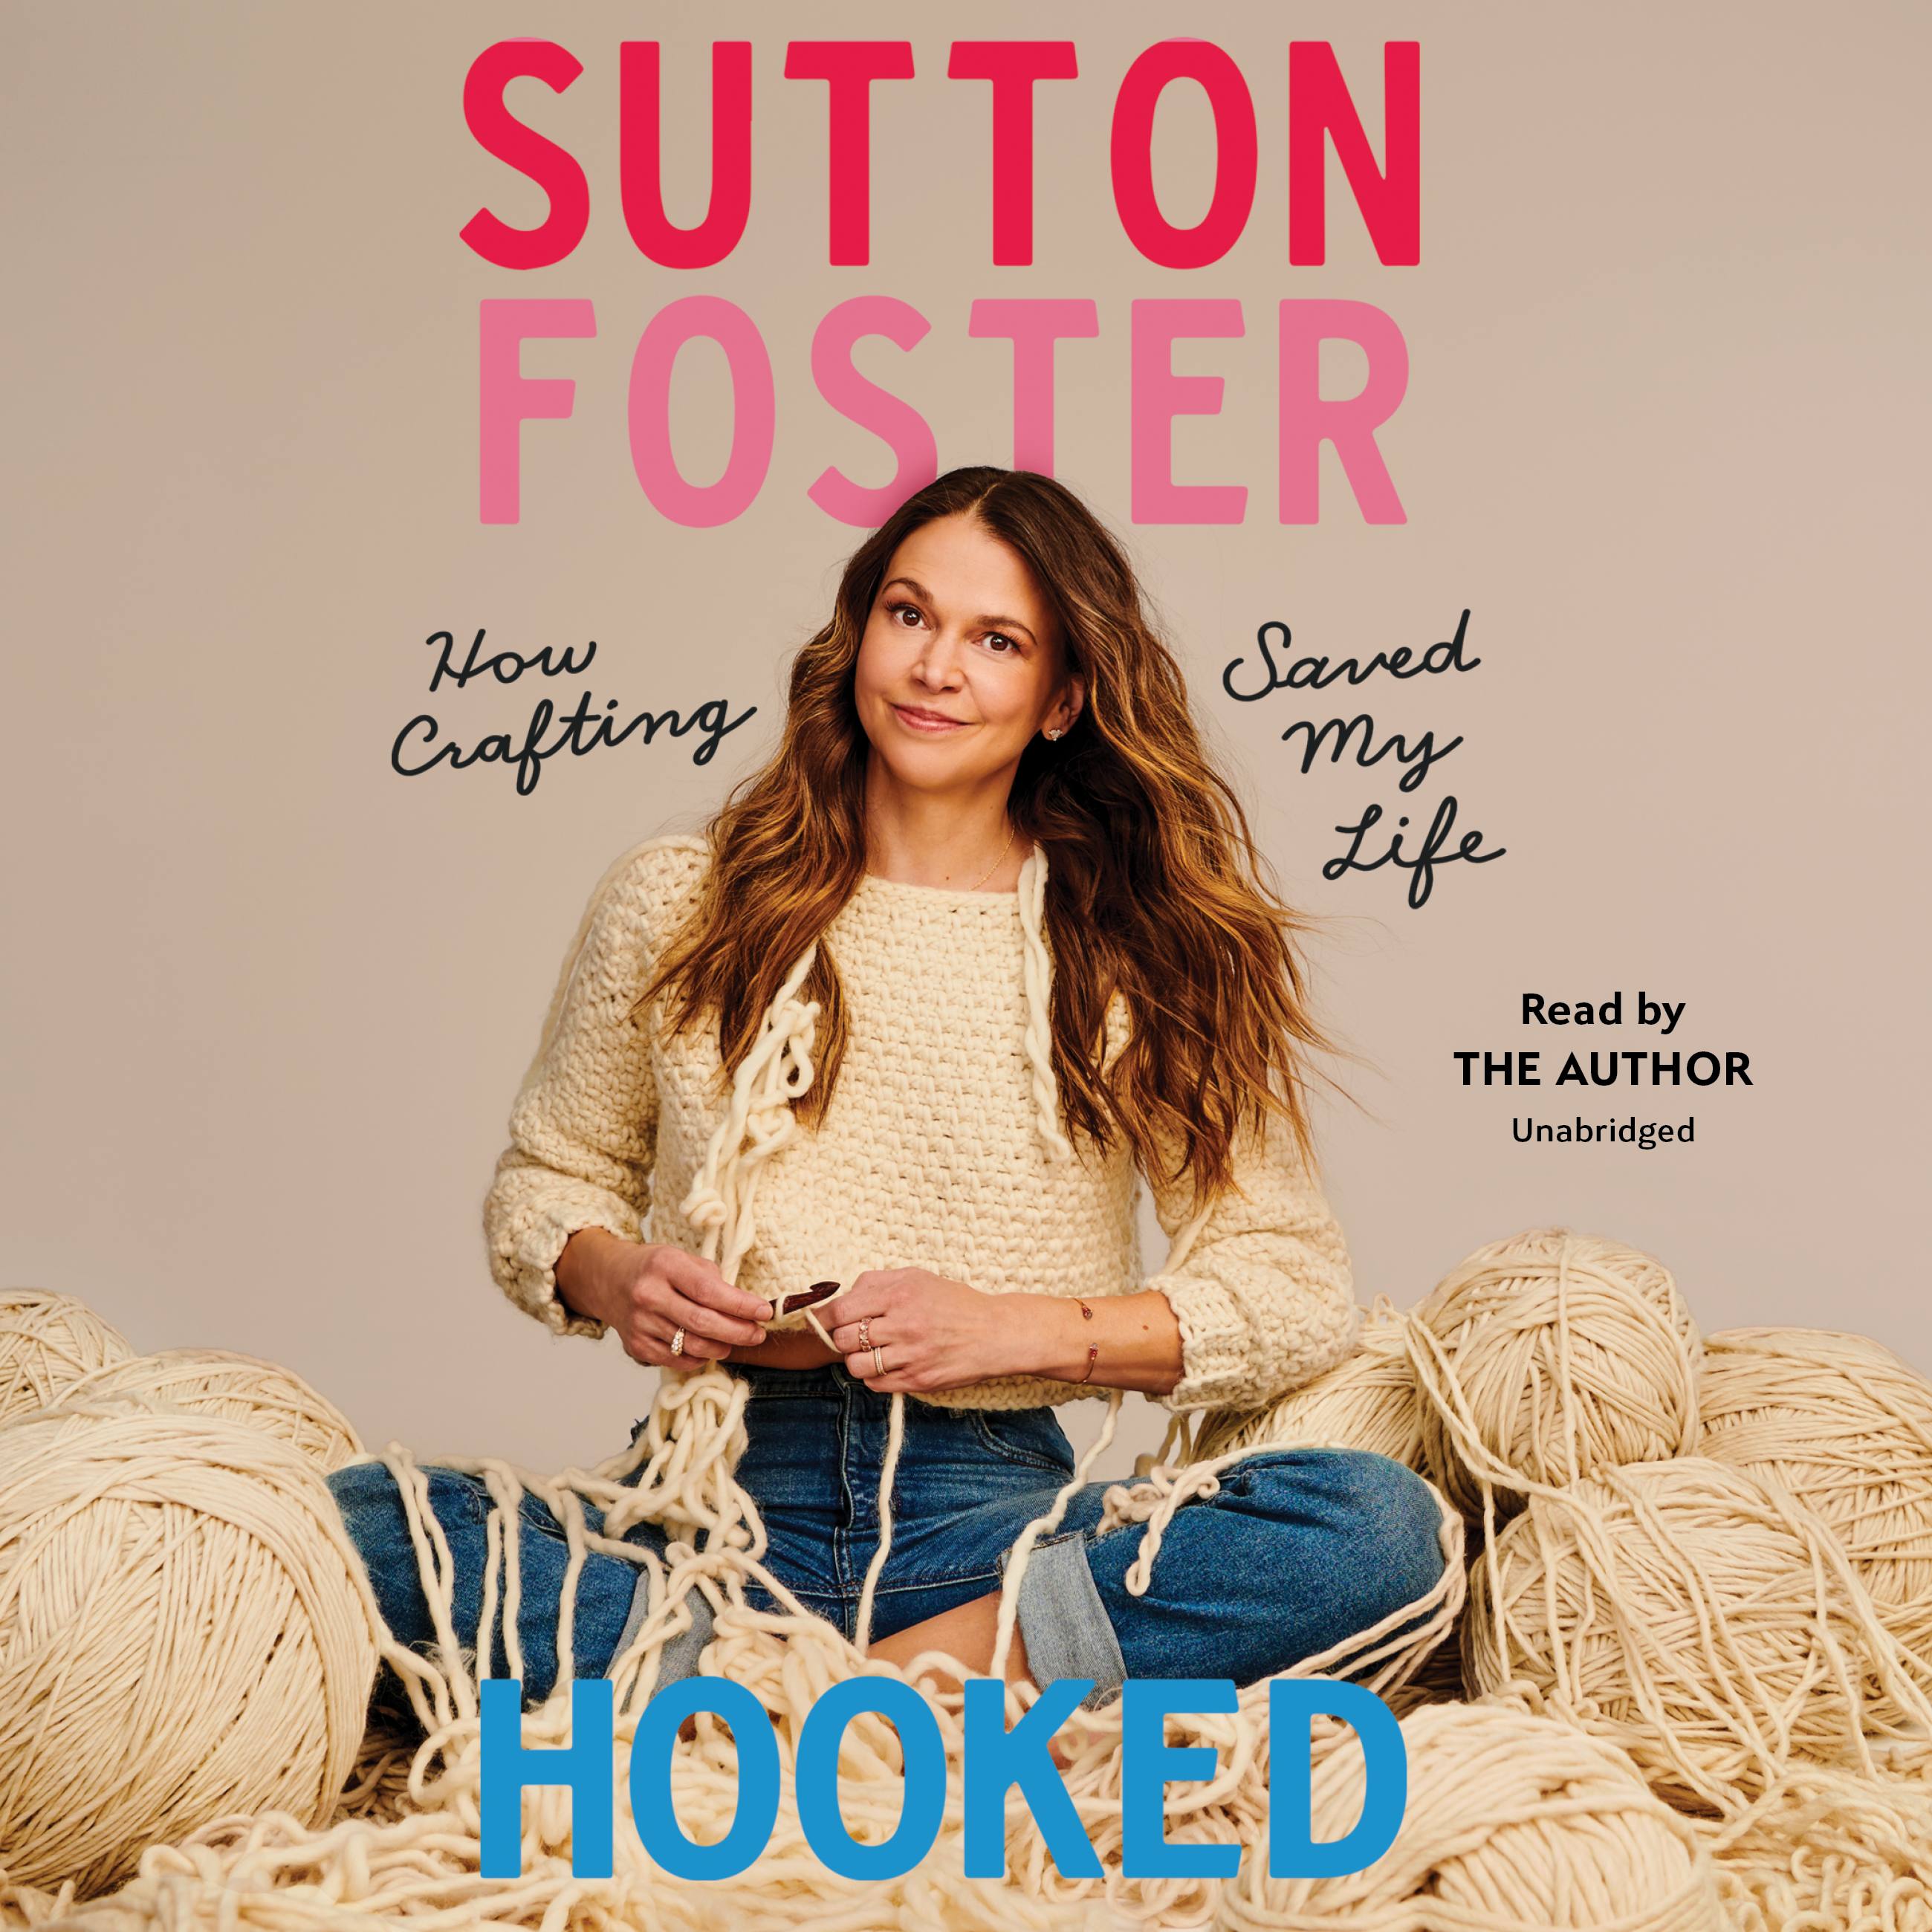 Hooked　Book　Foster　Hachette　Sutton　by　Group